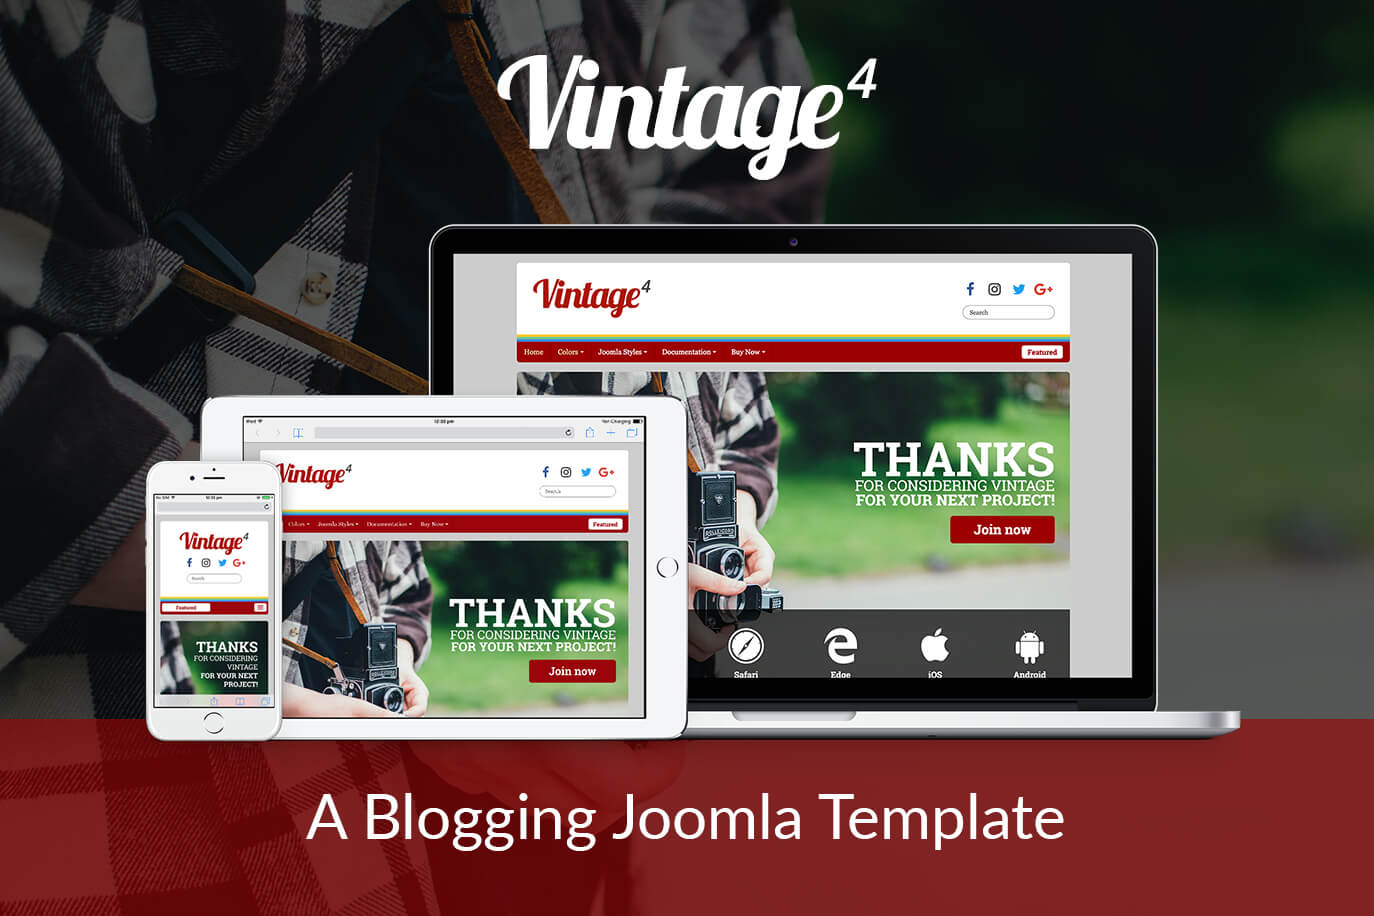 Vintage is a classic and timeless Joomla Template with new styles